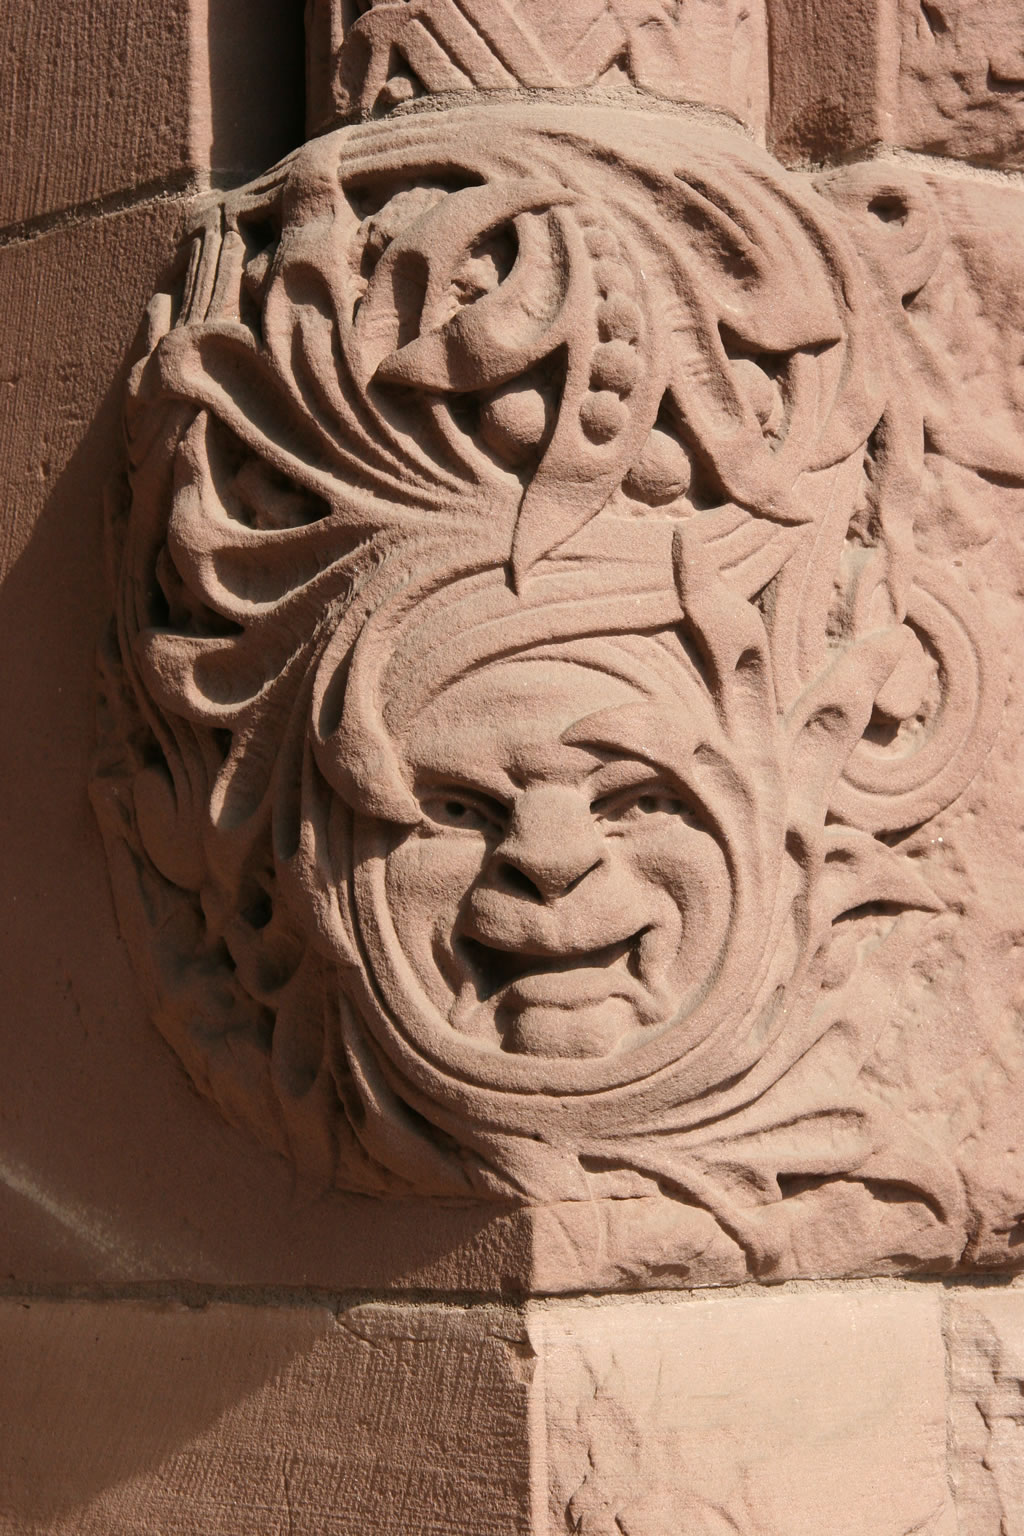 Face carved into the sandstone by the south entrance of the Legislative Building.